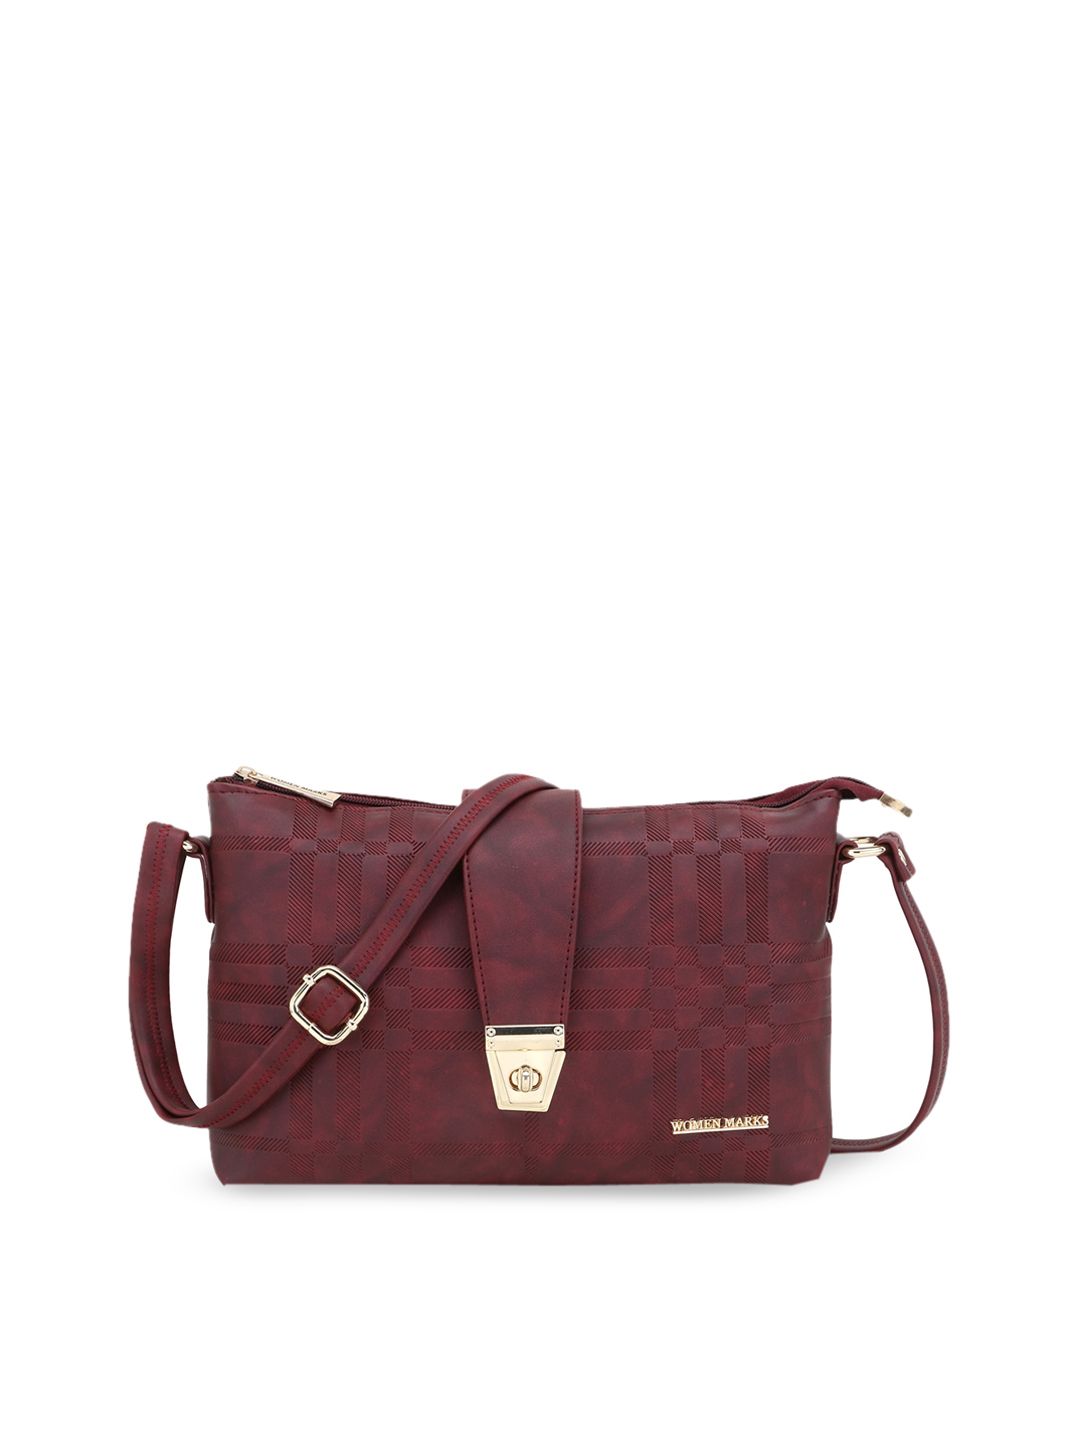 WOMEN MARKS Maroon Textured PU Structured Sling Bag Price in India